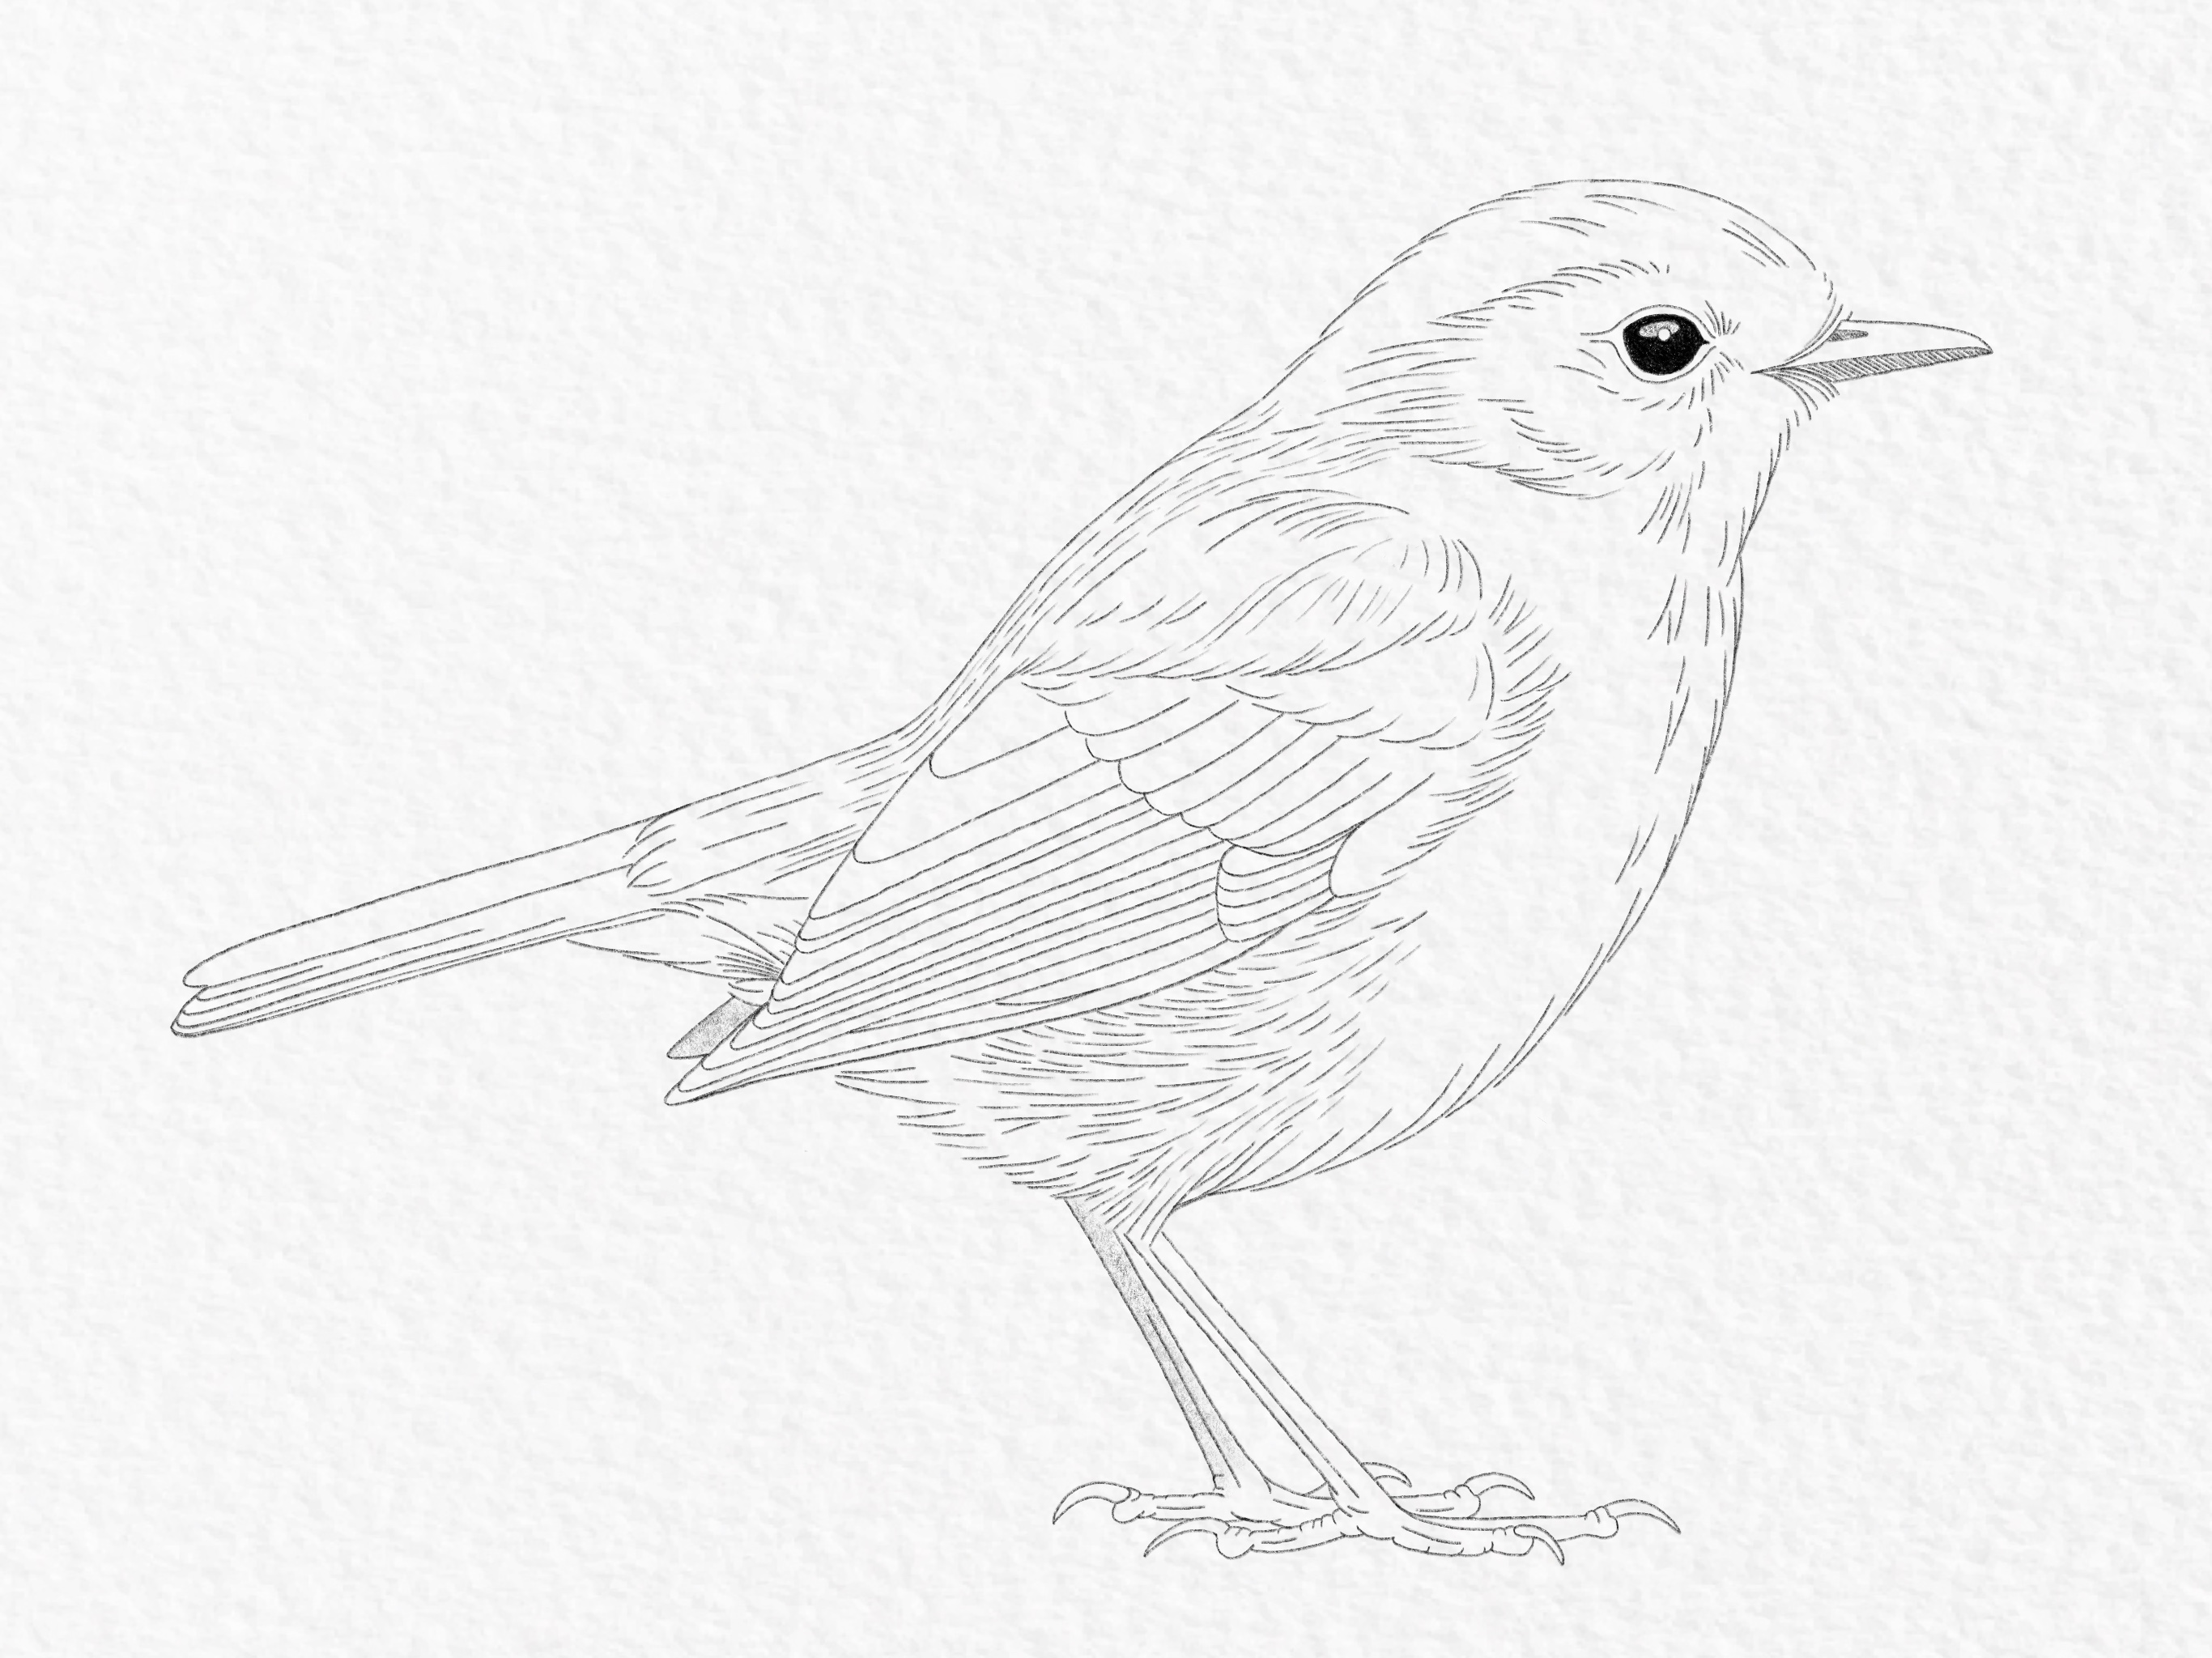 How to draw a bird - Step 20